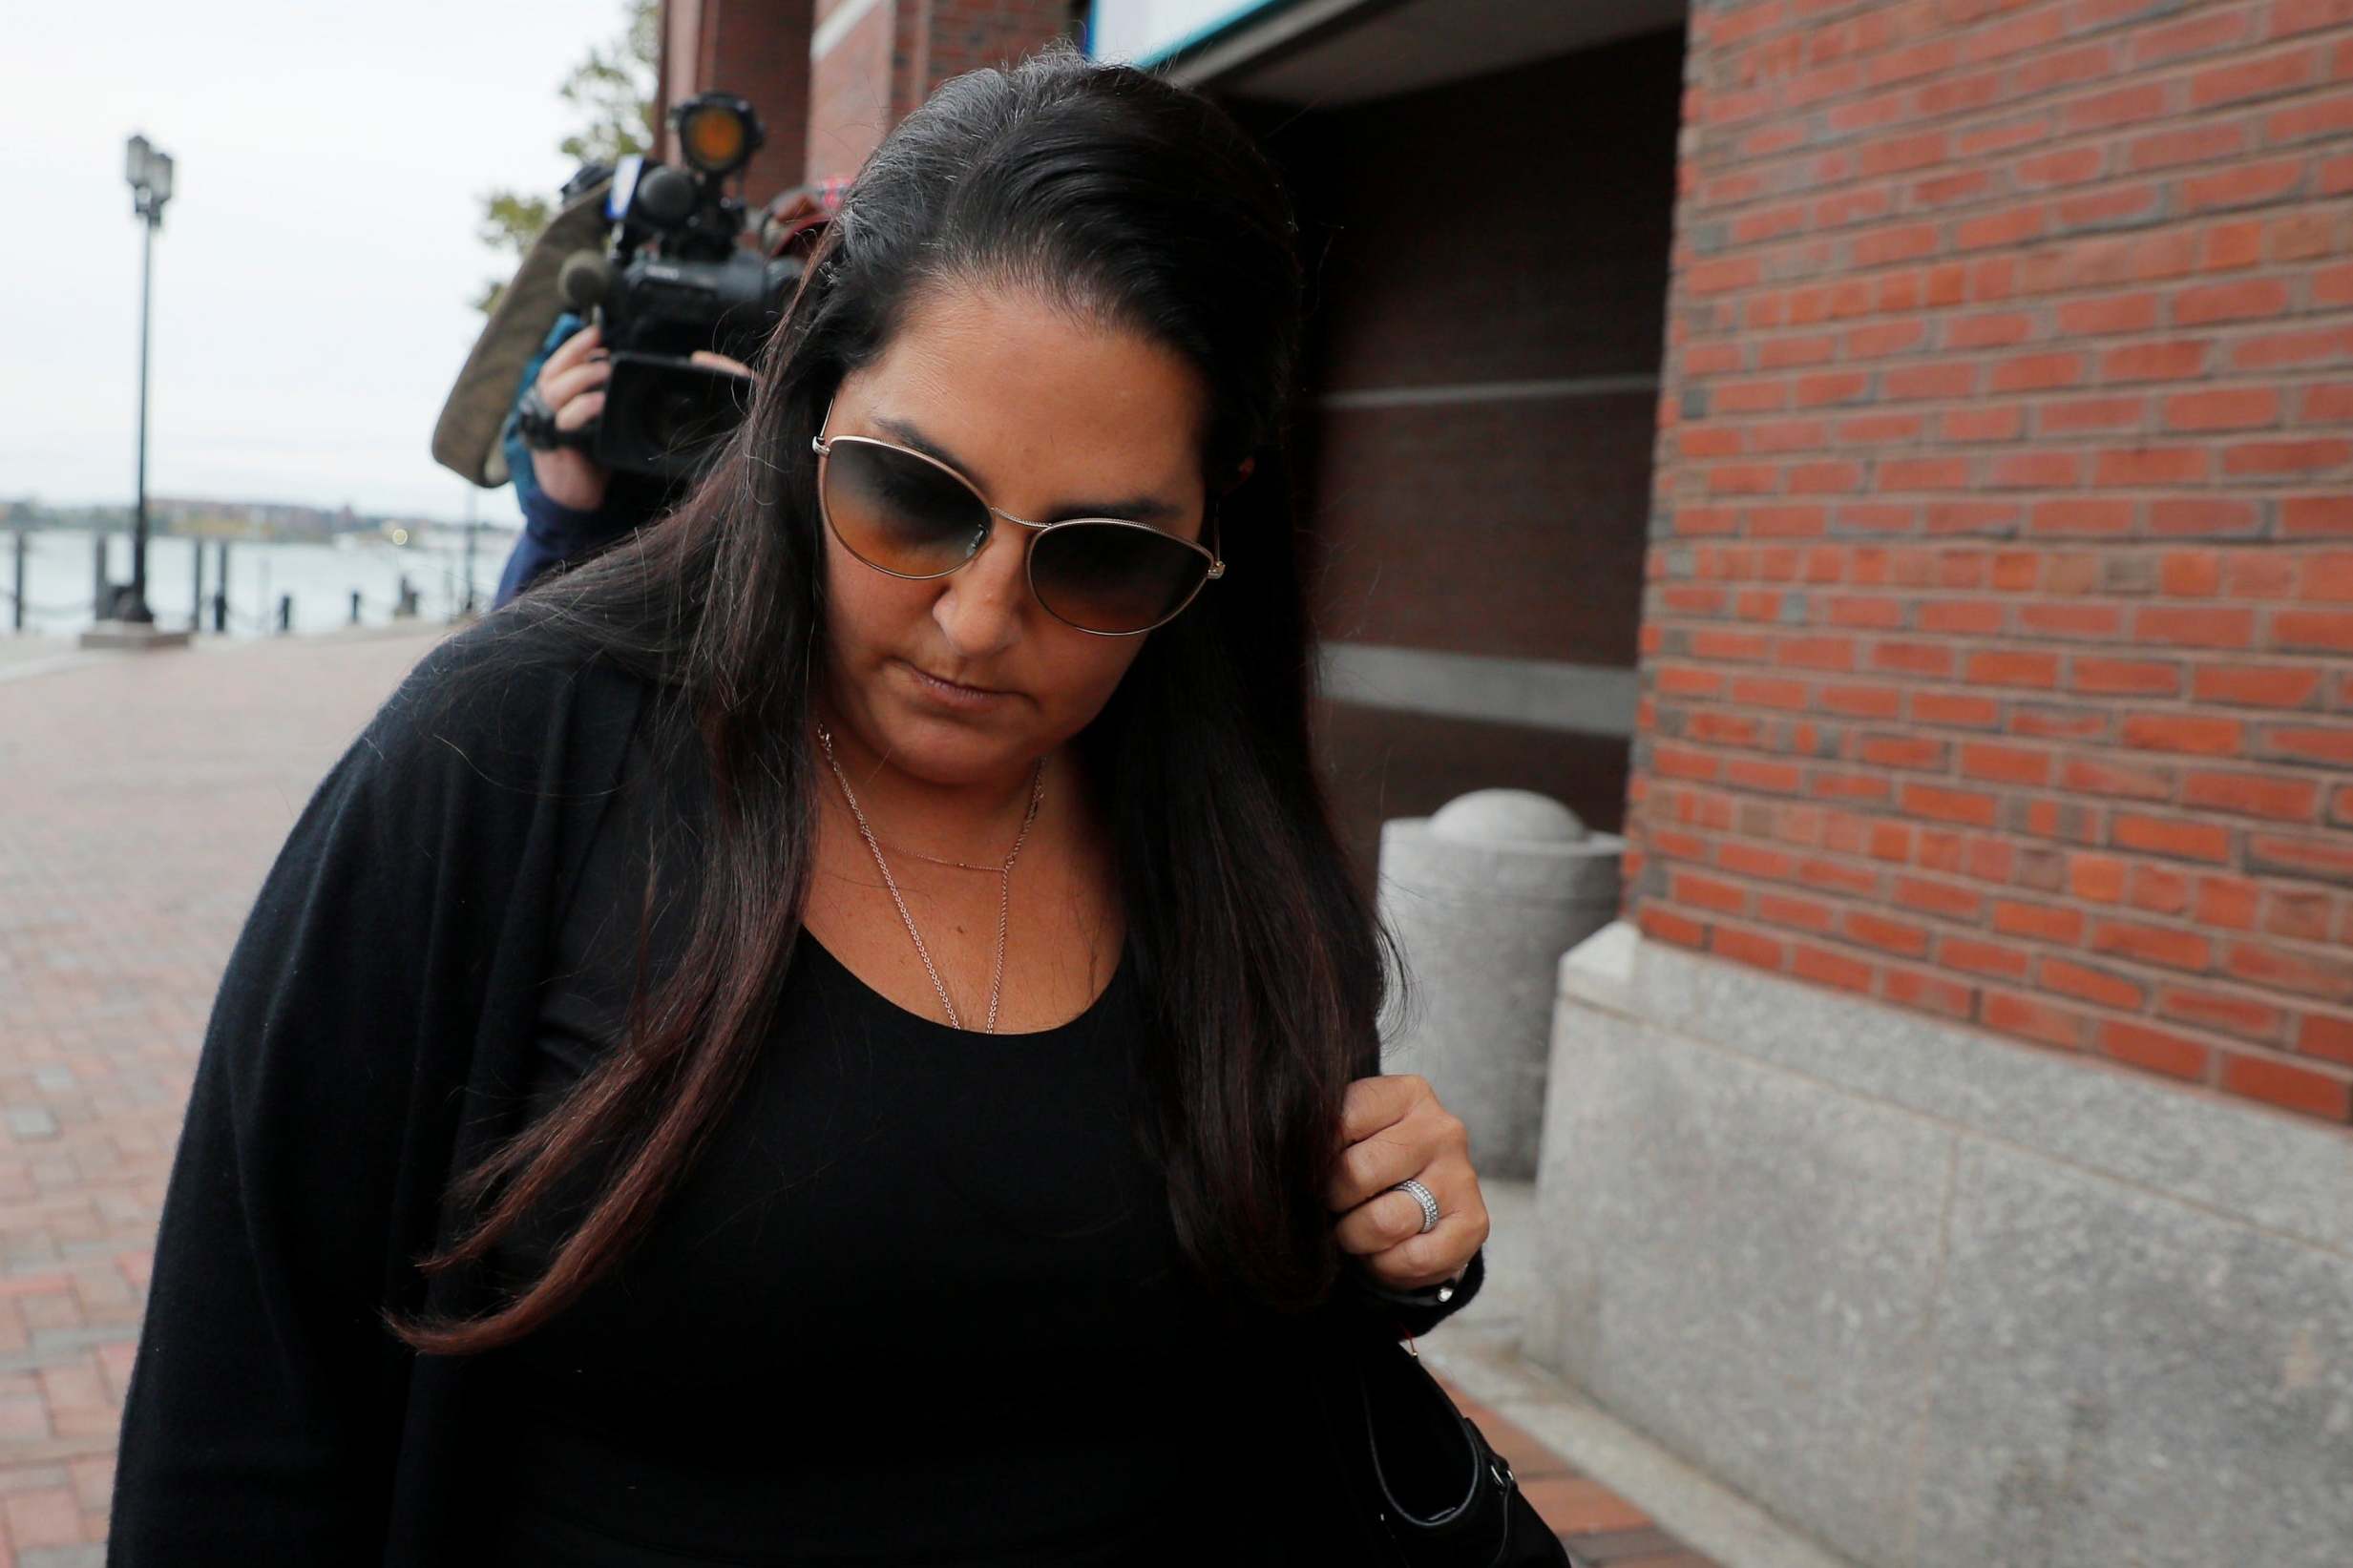 Marjorie Klapper received less than the four-month prison term that federal prosecutors in Boston sought